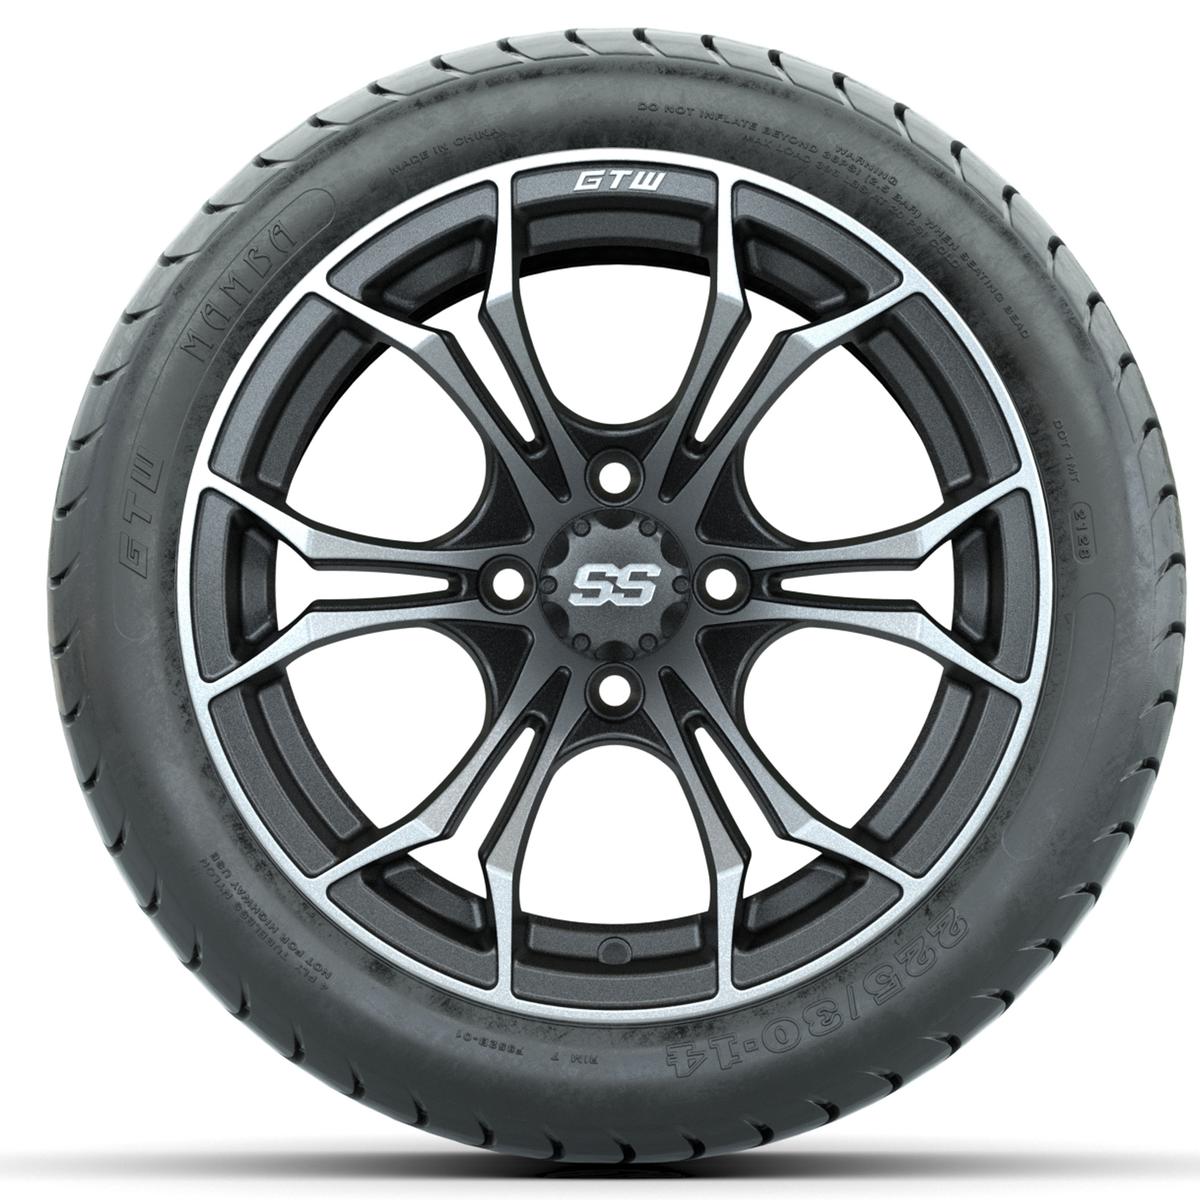 GTW Spyder Matte Grey 14 in Wheels with 225/30-14 Mamba Street Tires – Full Set